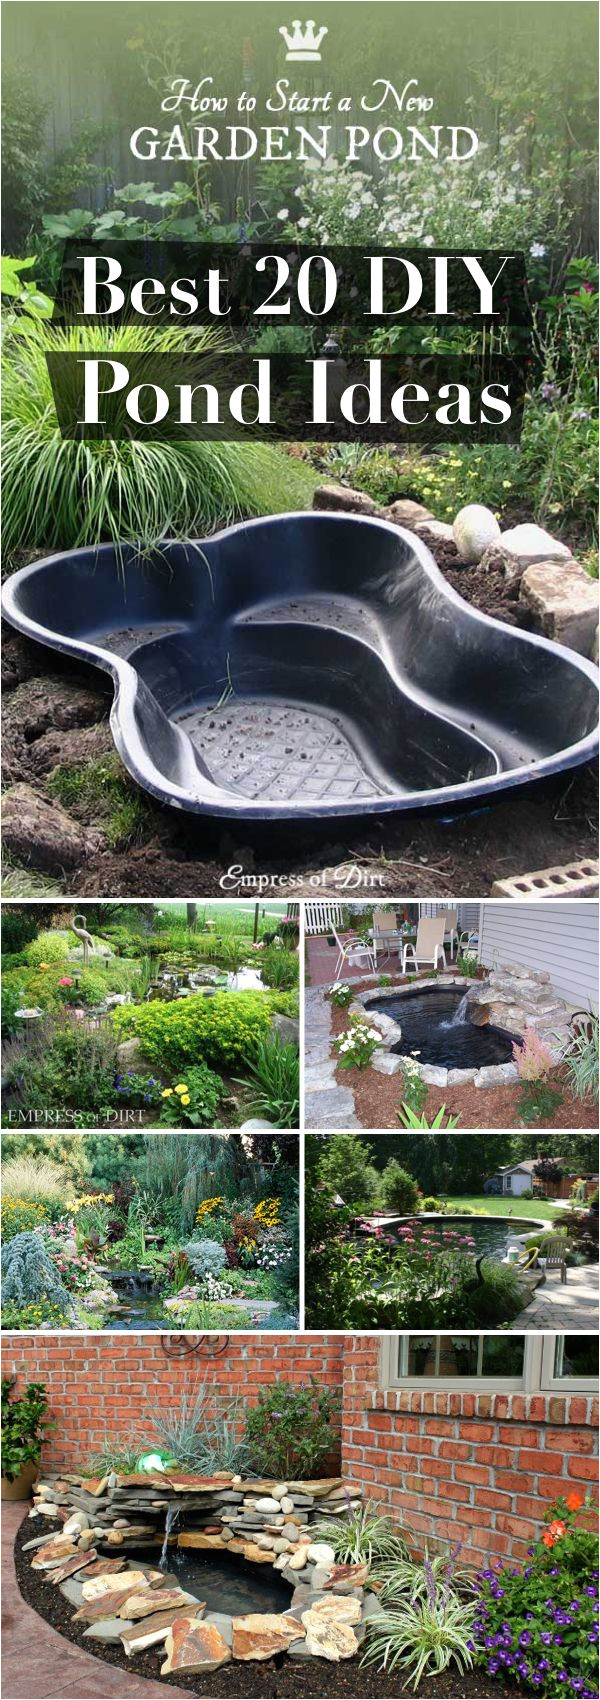 20 innovative diy pond ideas letting you build a water feature from scratch